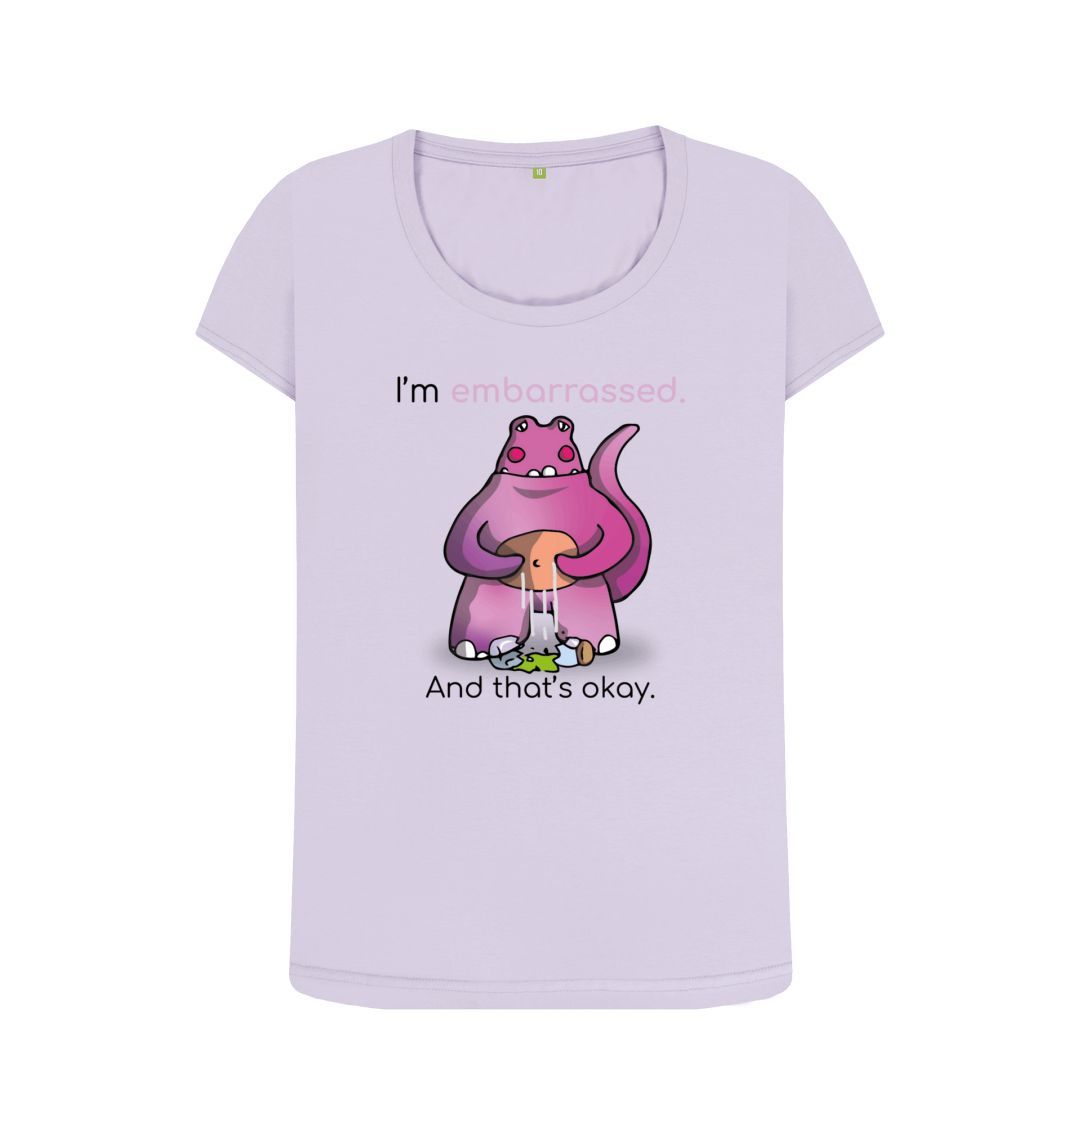 Violet Embarrassed Emotion Woman's Scoop Neck Organic Mental Health T-Shirt